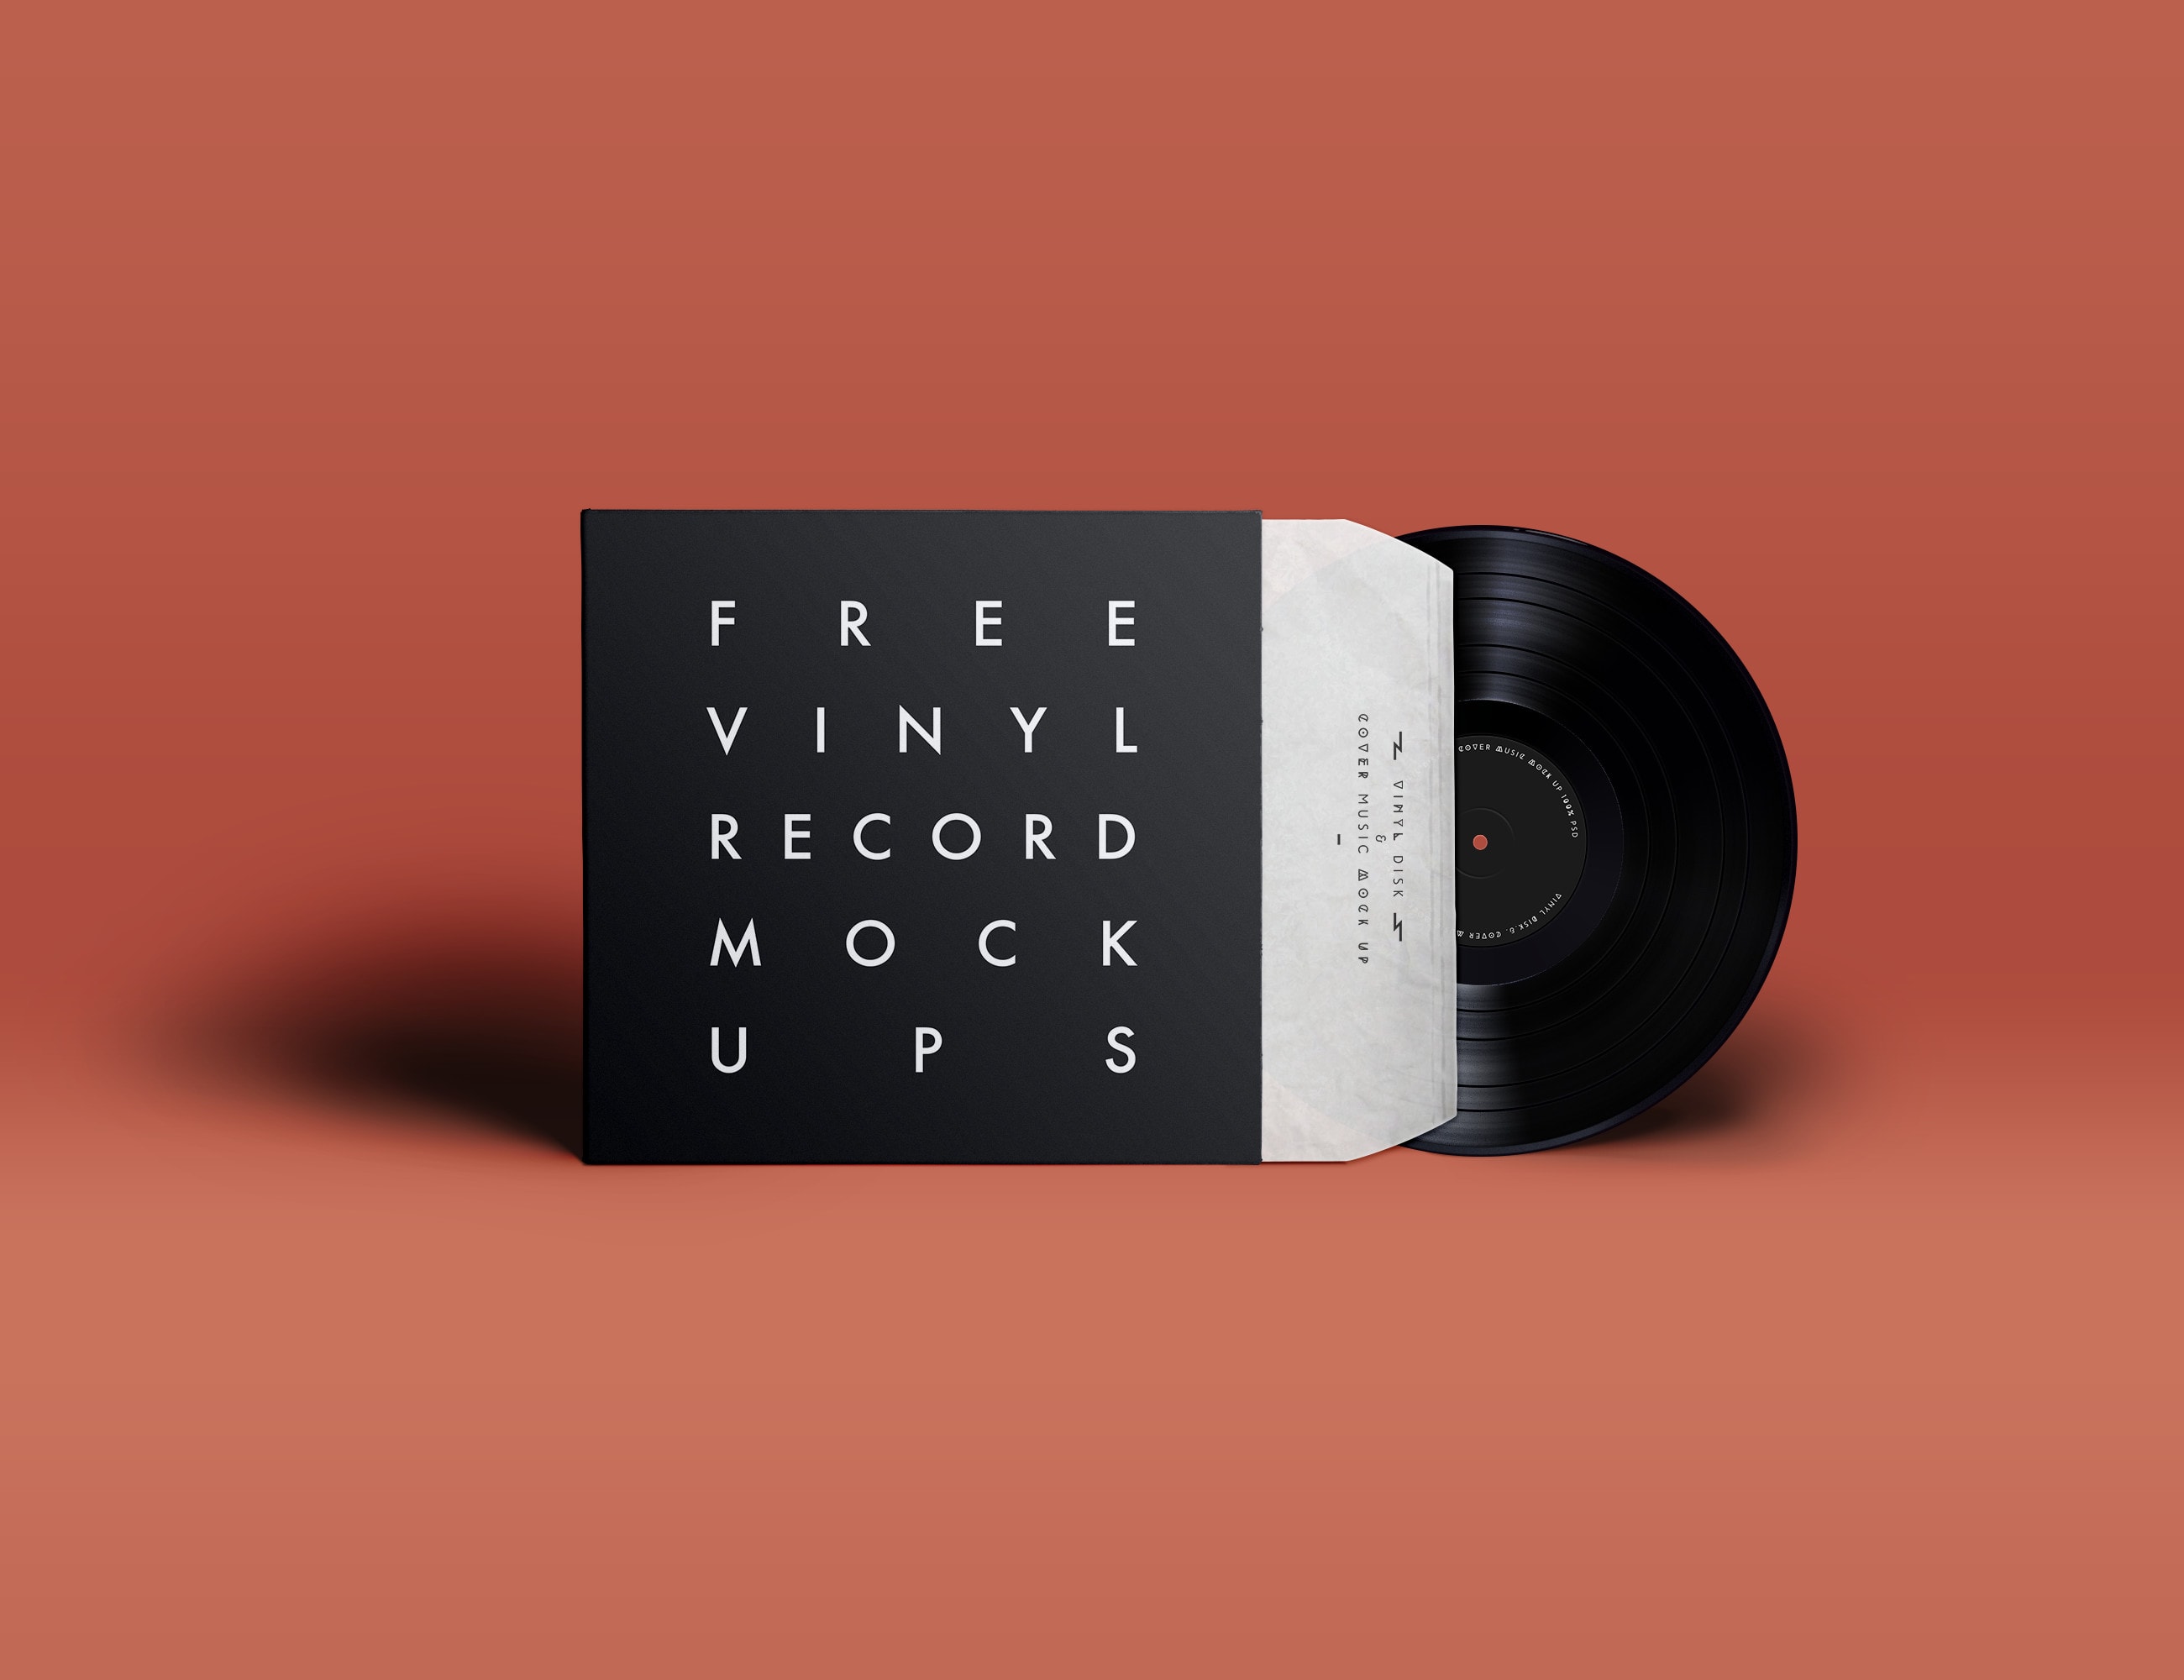 Download The 5+ Best FREE Vinyl Record PSD Mock-Ups - Hipsthetic